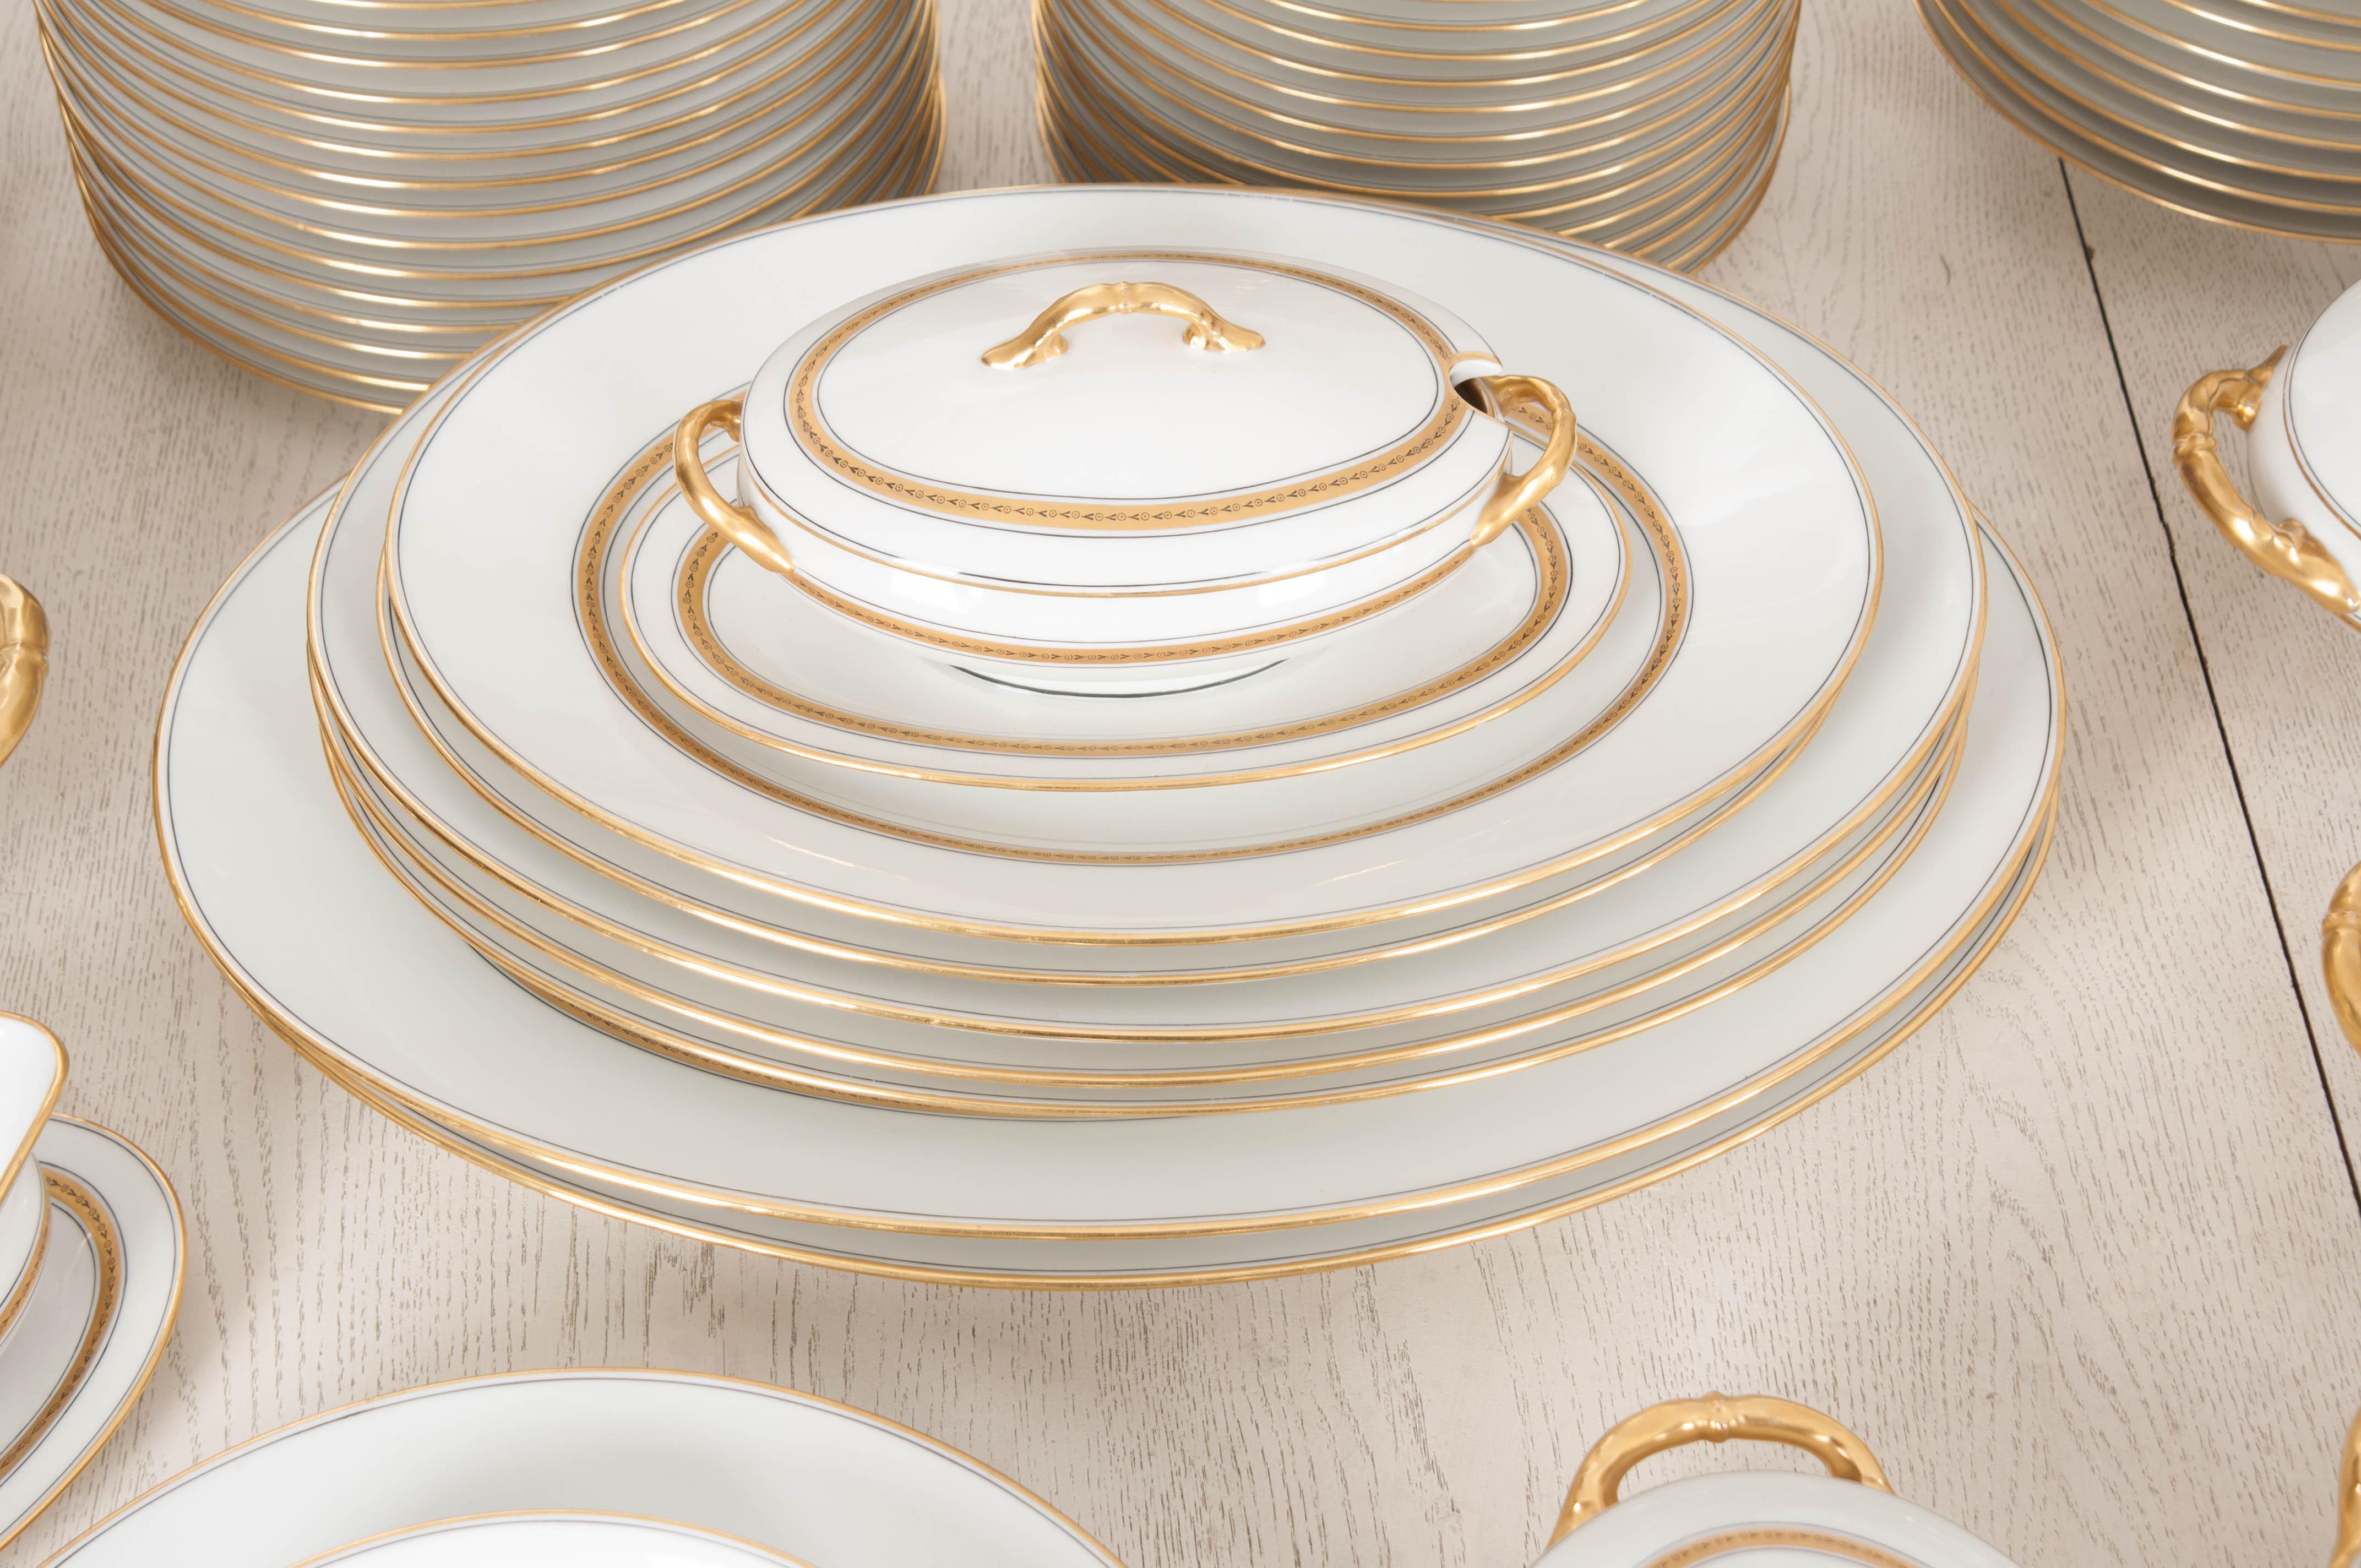 This fine Limoges porcelain 93-piece luncheon service with gilt banding, c.1910’s, was sold by the Dutch retailer, P.A.W. Philippona s’Gravenhage (The Hague), and so marked. The set also bears the Limoges mark of MC (script) within a triangle, each